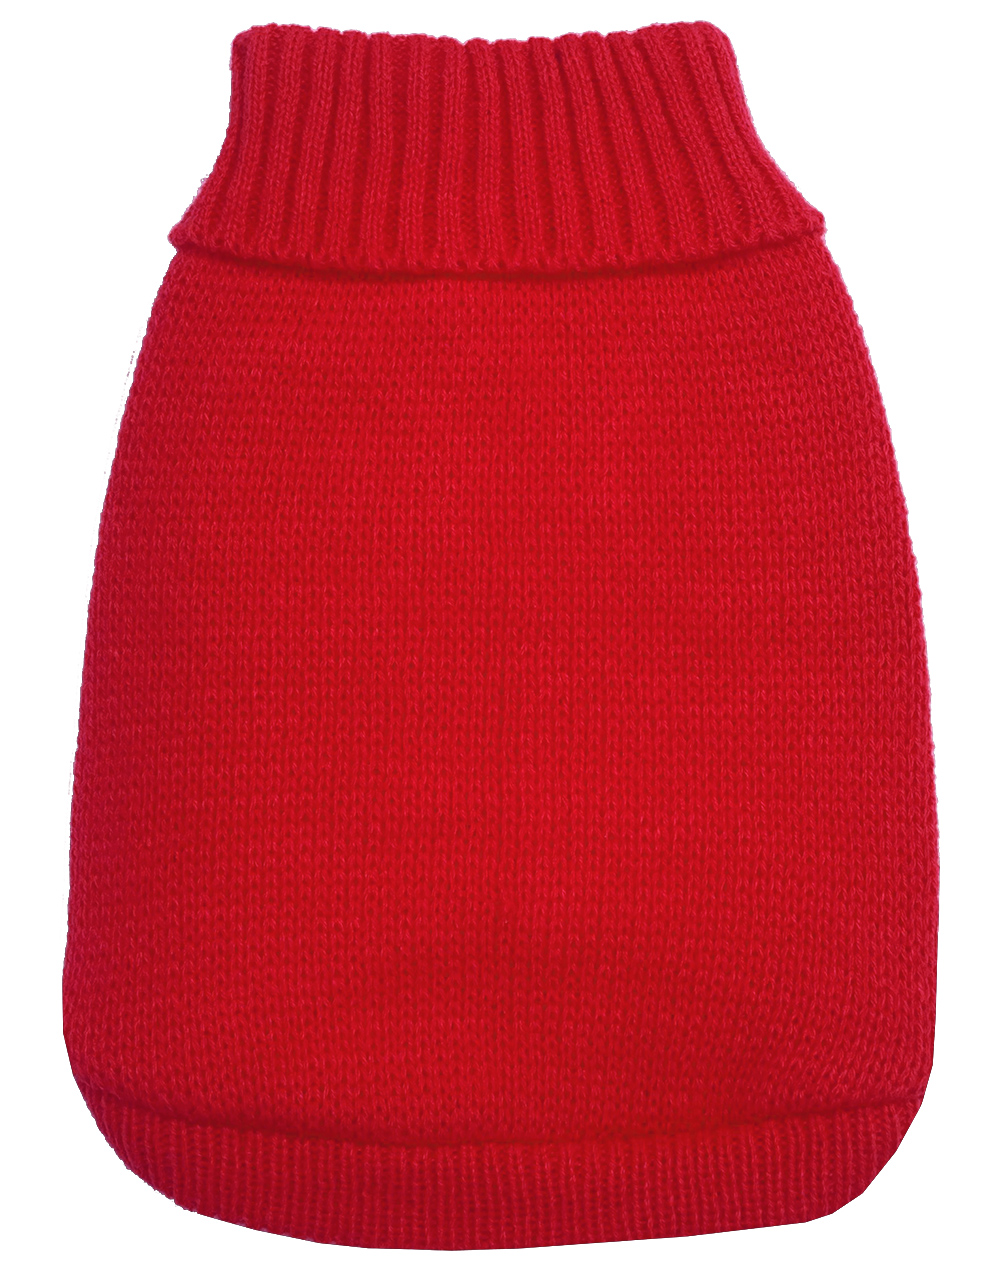 Knit Pet Sweater Red Size Large